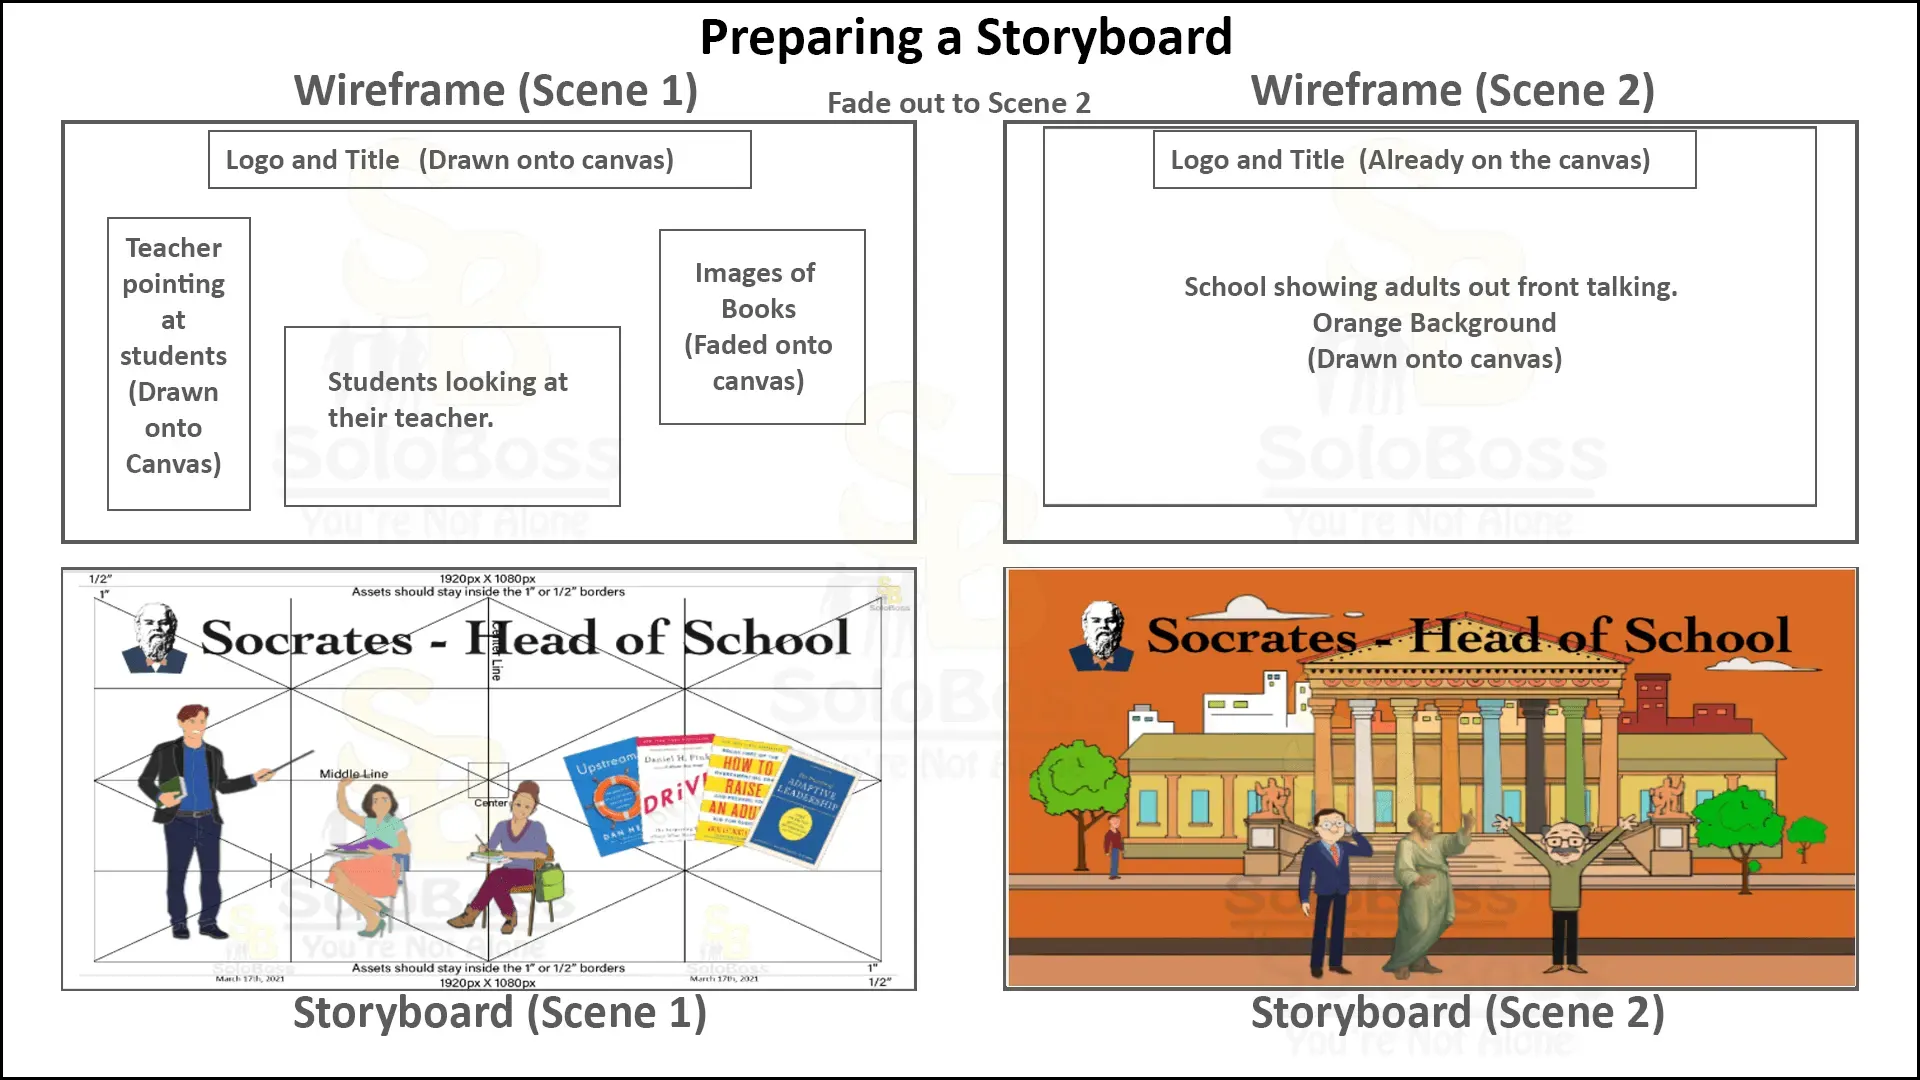 Shows how to prepare a storyboard for video design customers.